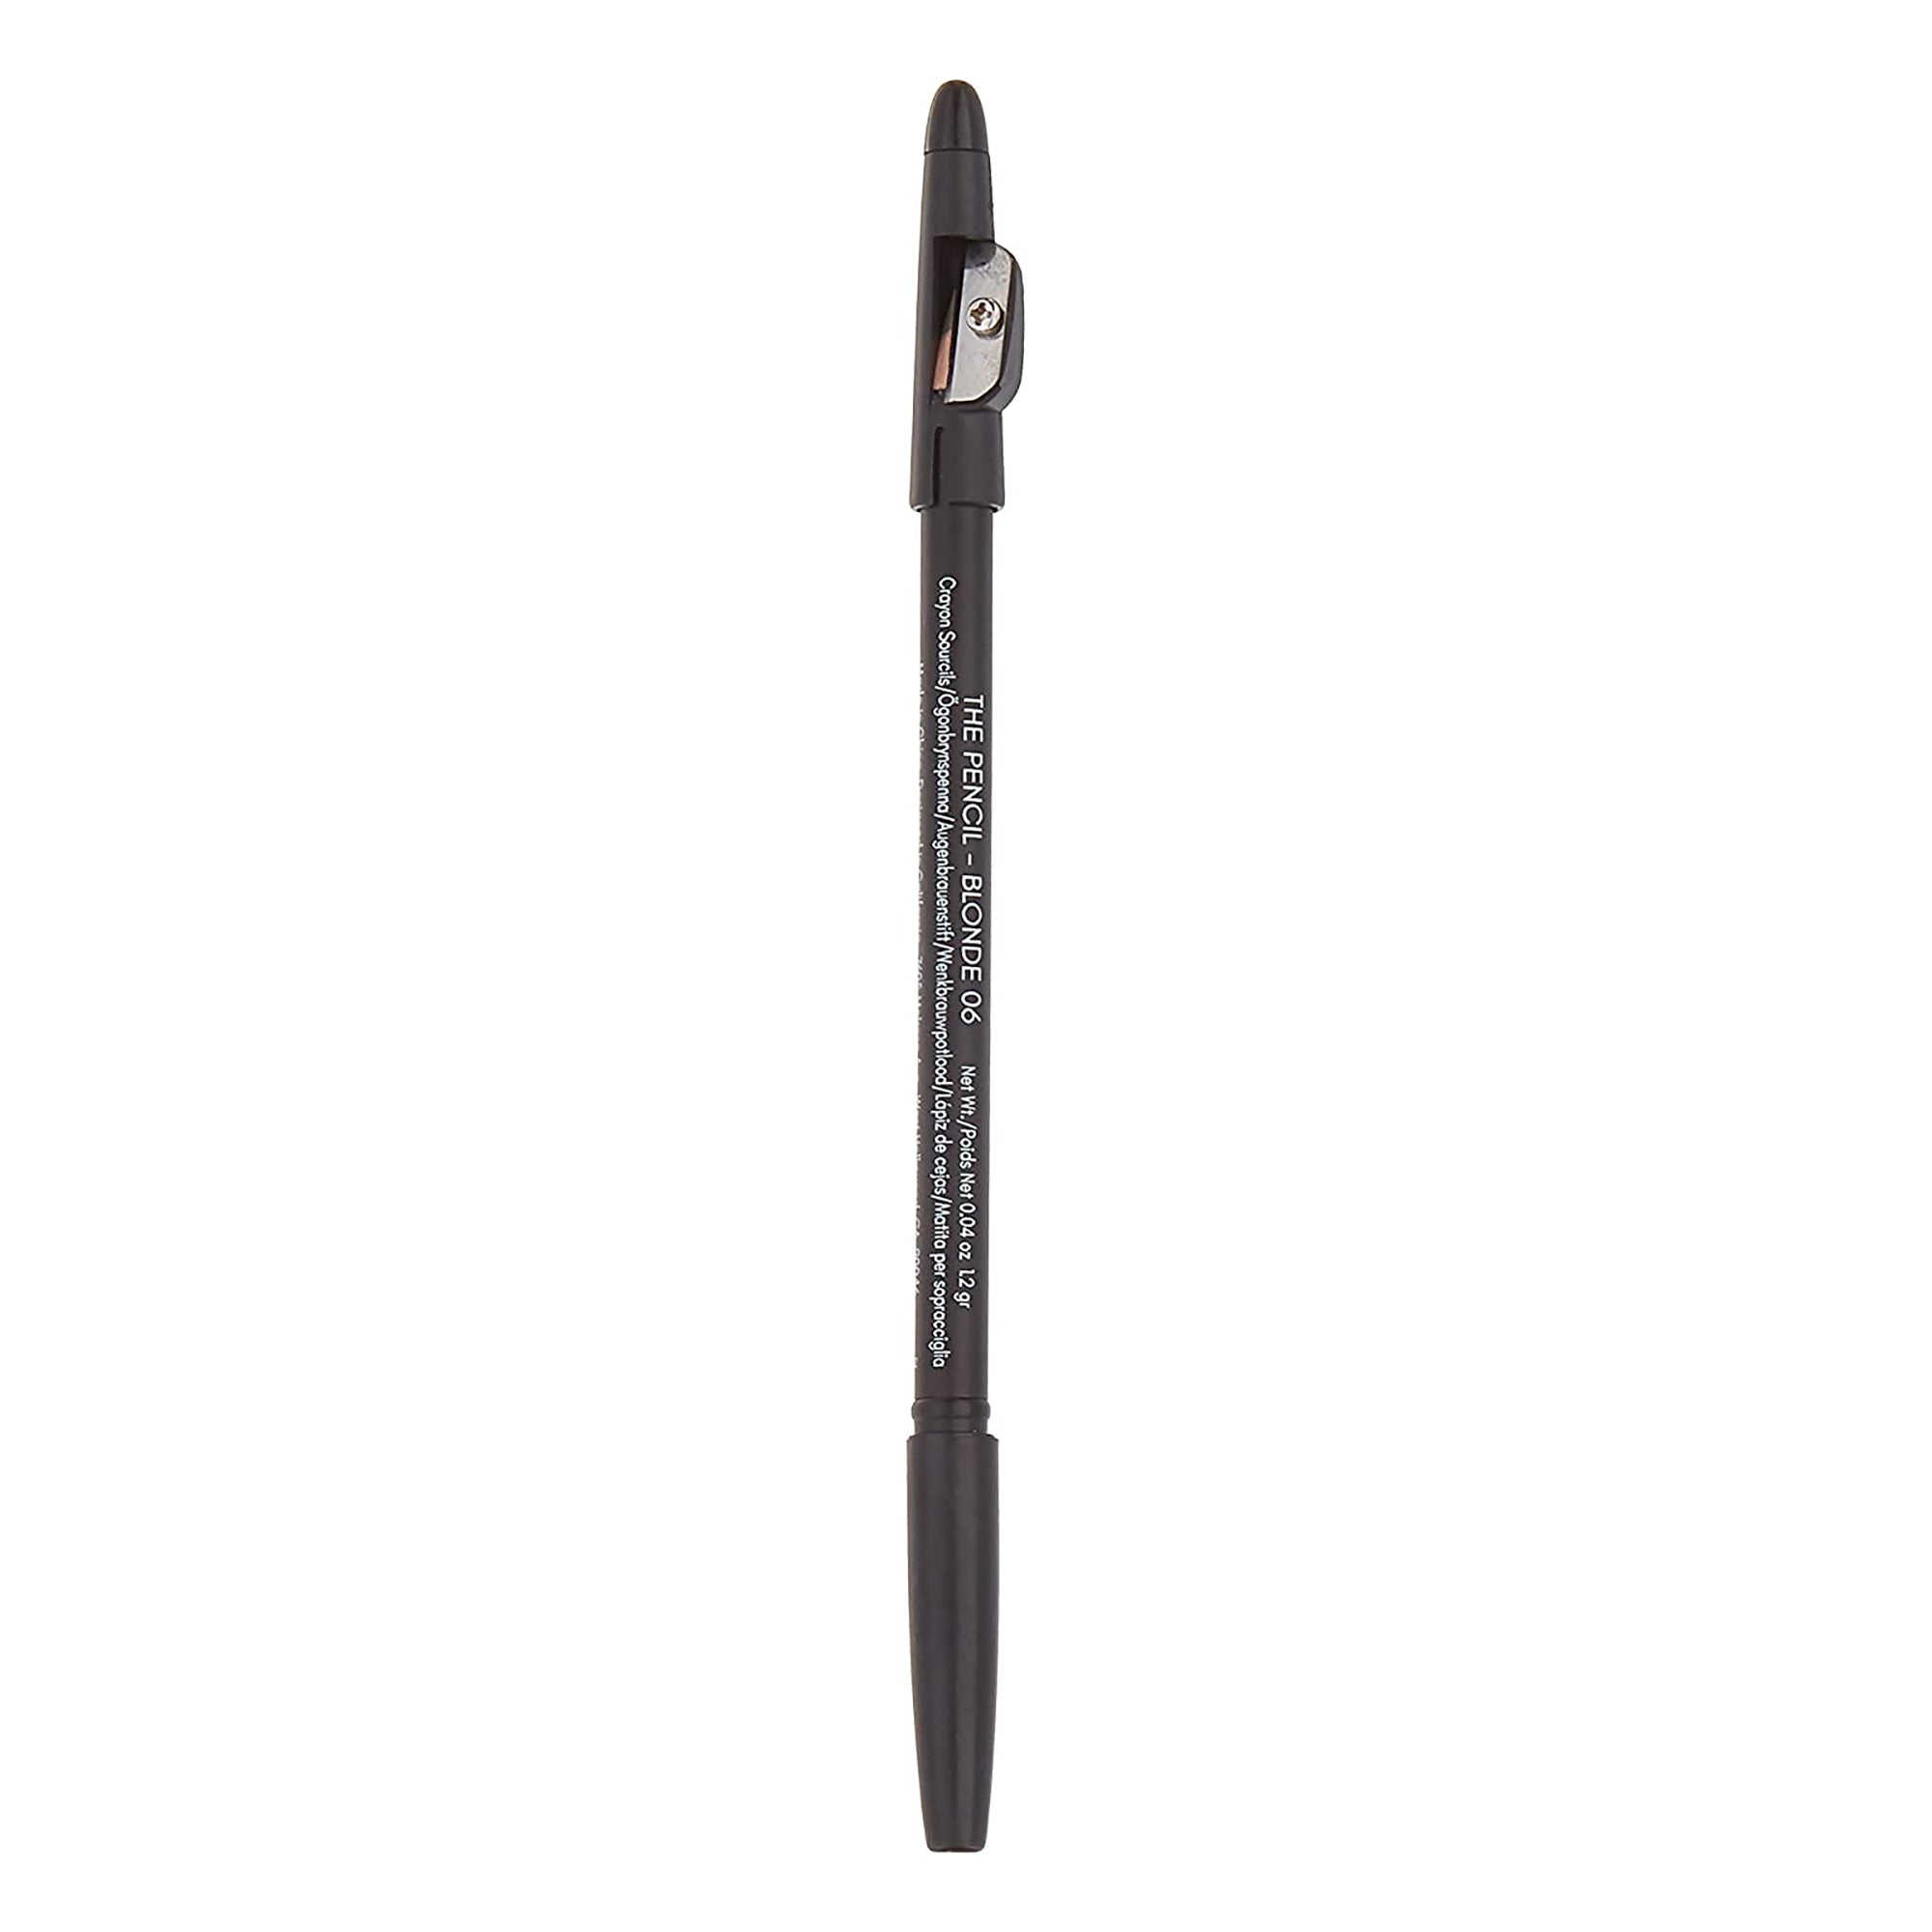 The BrowGal Skinny Eyebrow Pencil -Golden Blonde 06